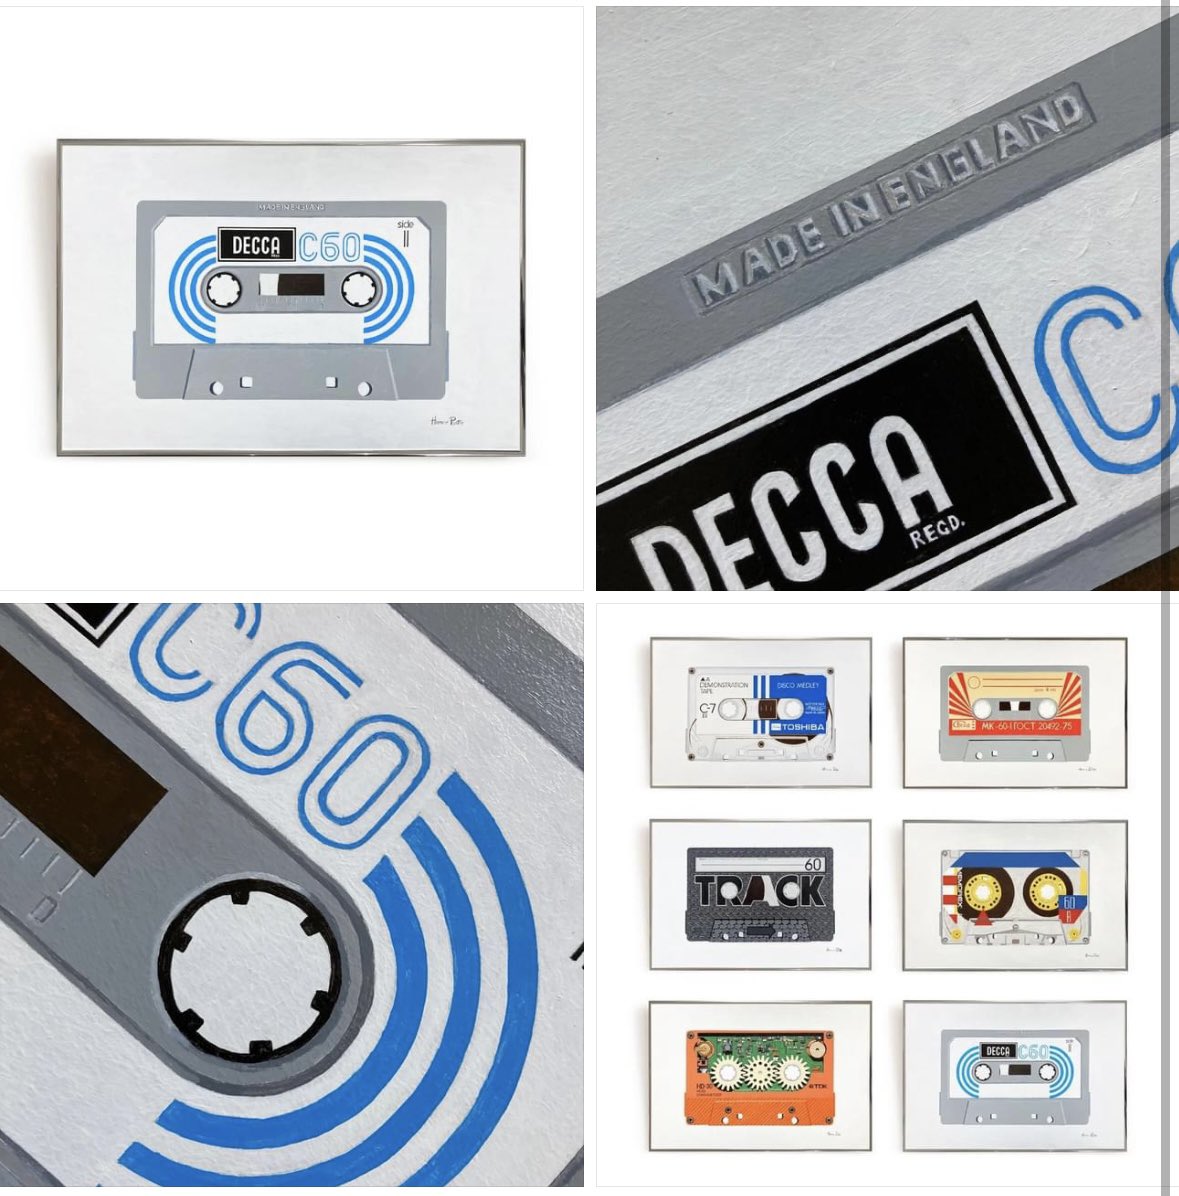 Meanwhile @RedHouseGallery #Harrogate… original cassette paintings: 'The tapes are like my soup cans.' Horace Panter Now showing 'Decca C60' by Horace Panter, from the artist's series of 'Cassette' paintings. Enquiries: mailto:info@redhouseoriginals.com